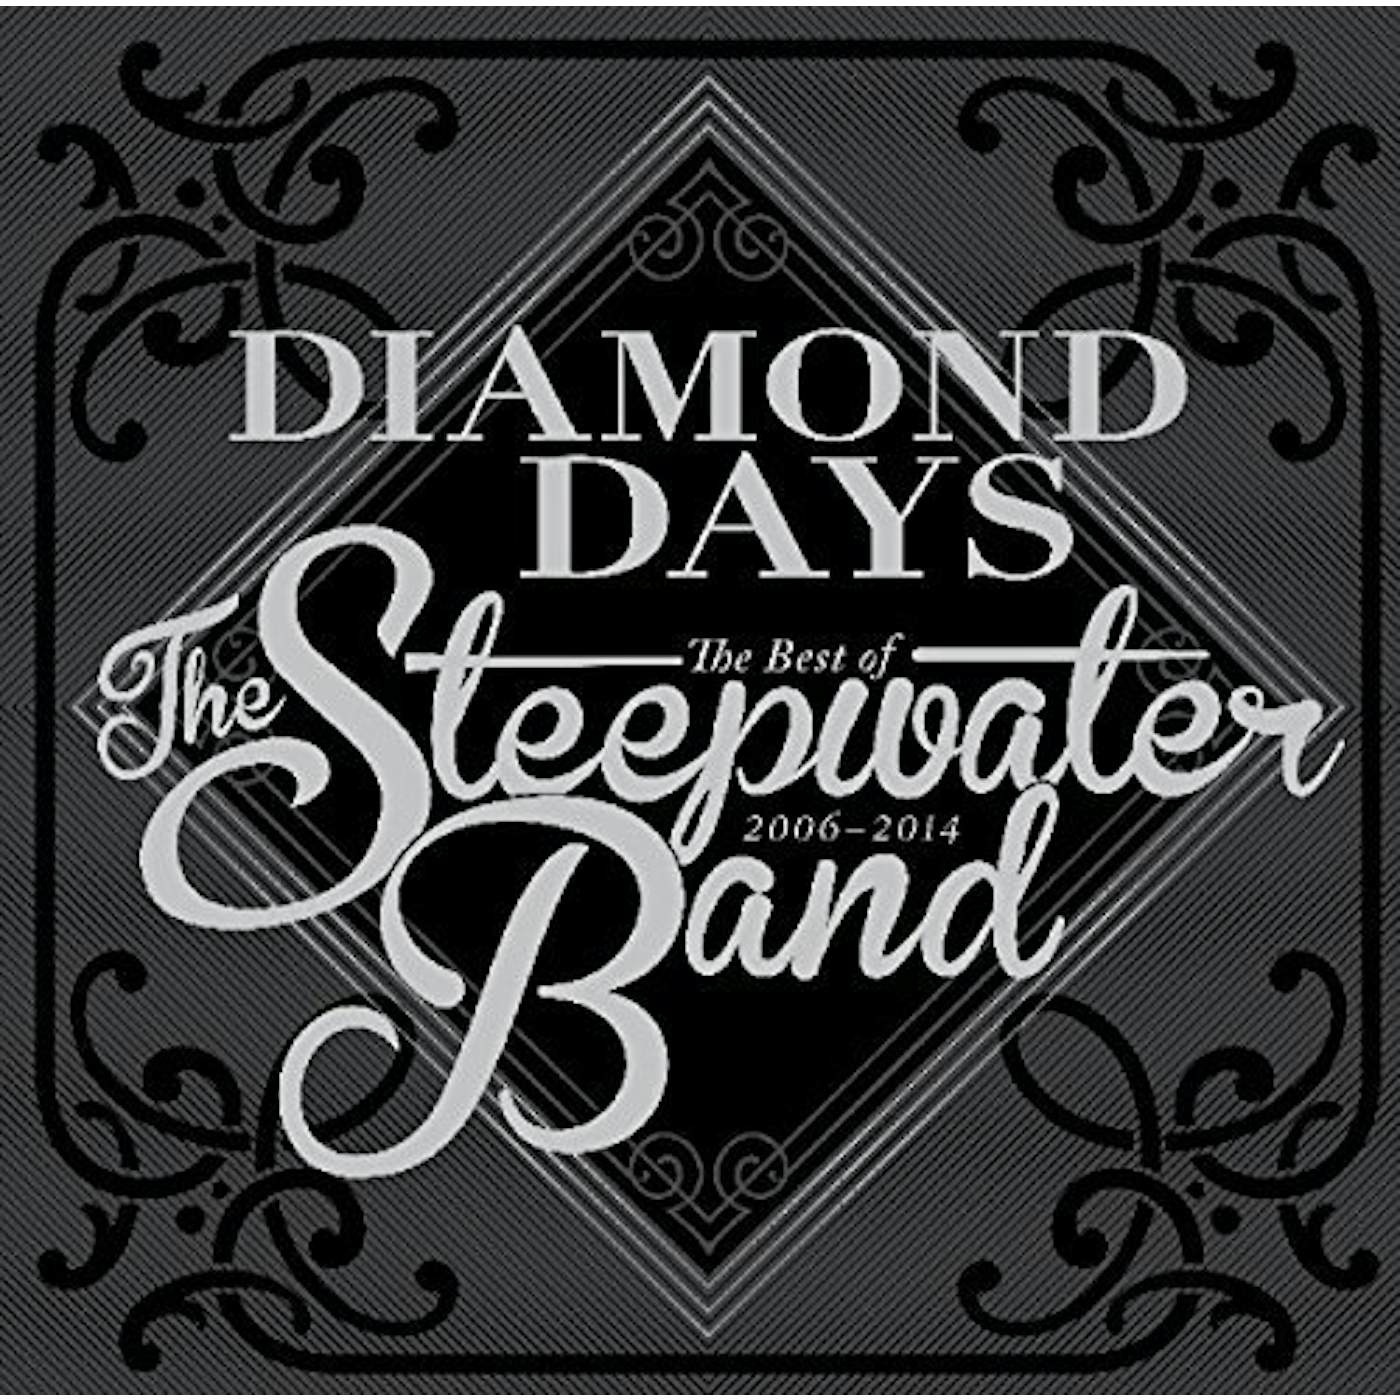 DIAMOND DAYS: BEST OF THE STEEPWATER BAND 2006-14 CD